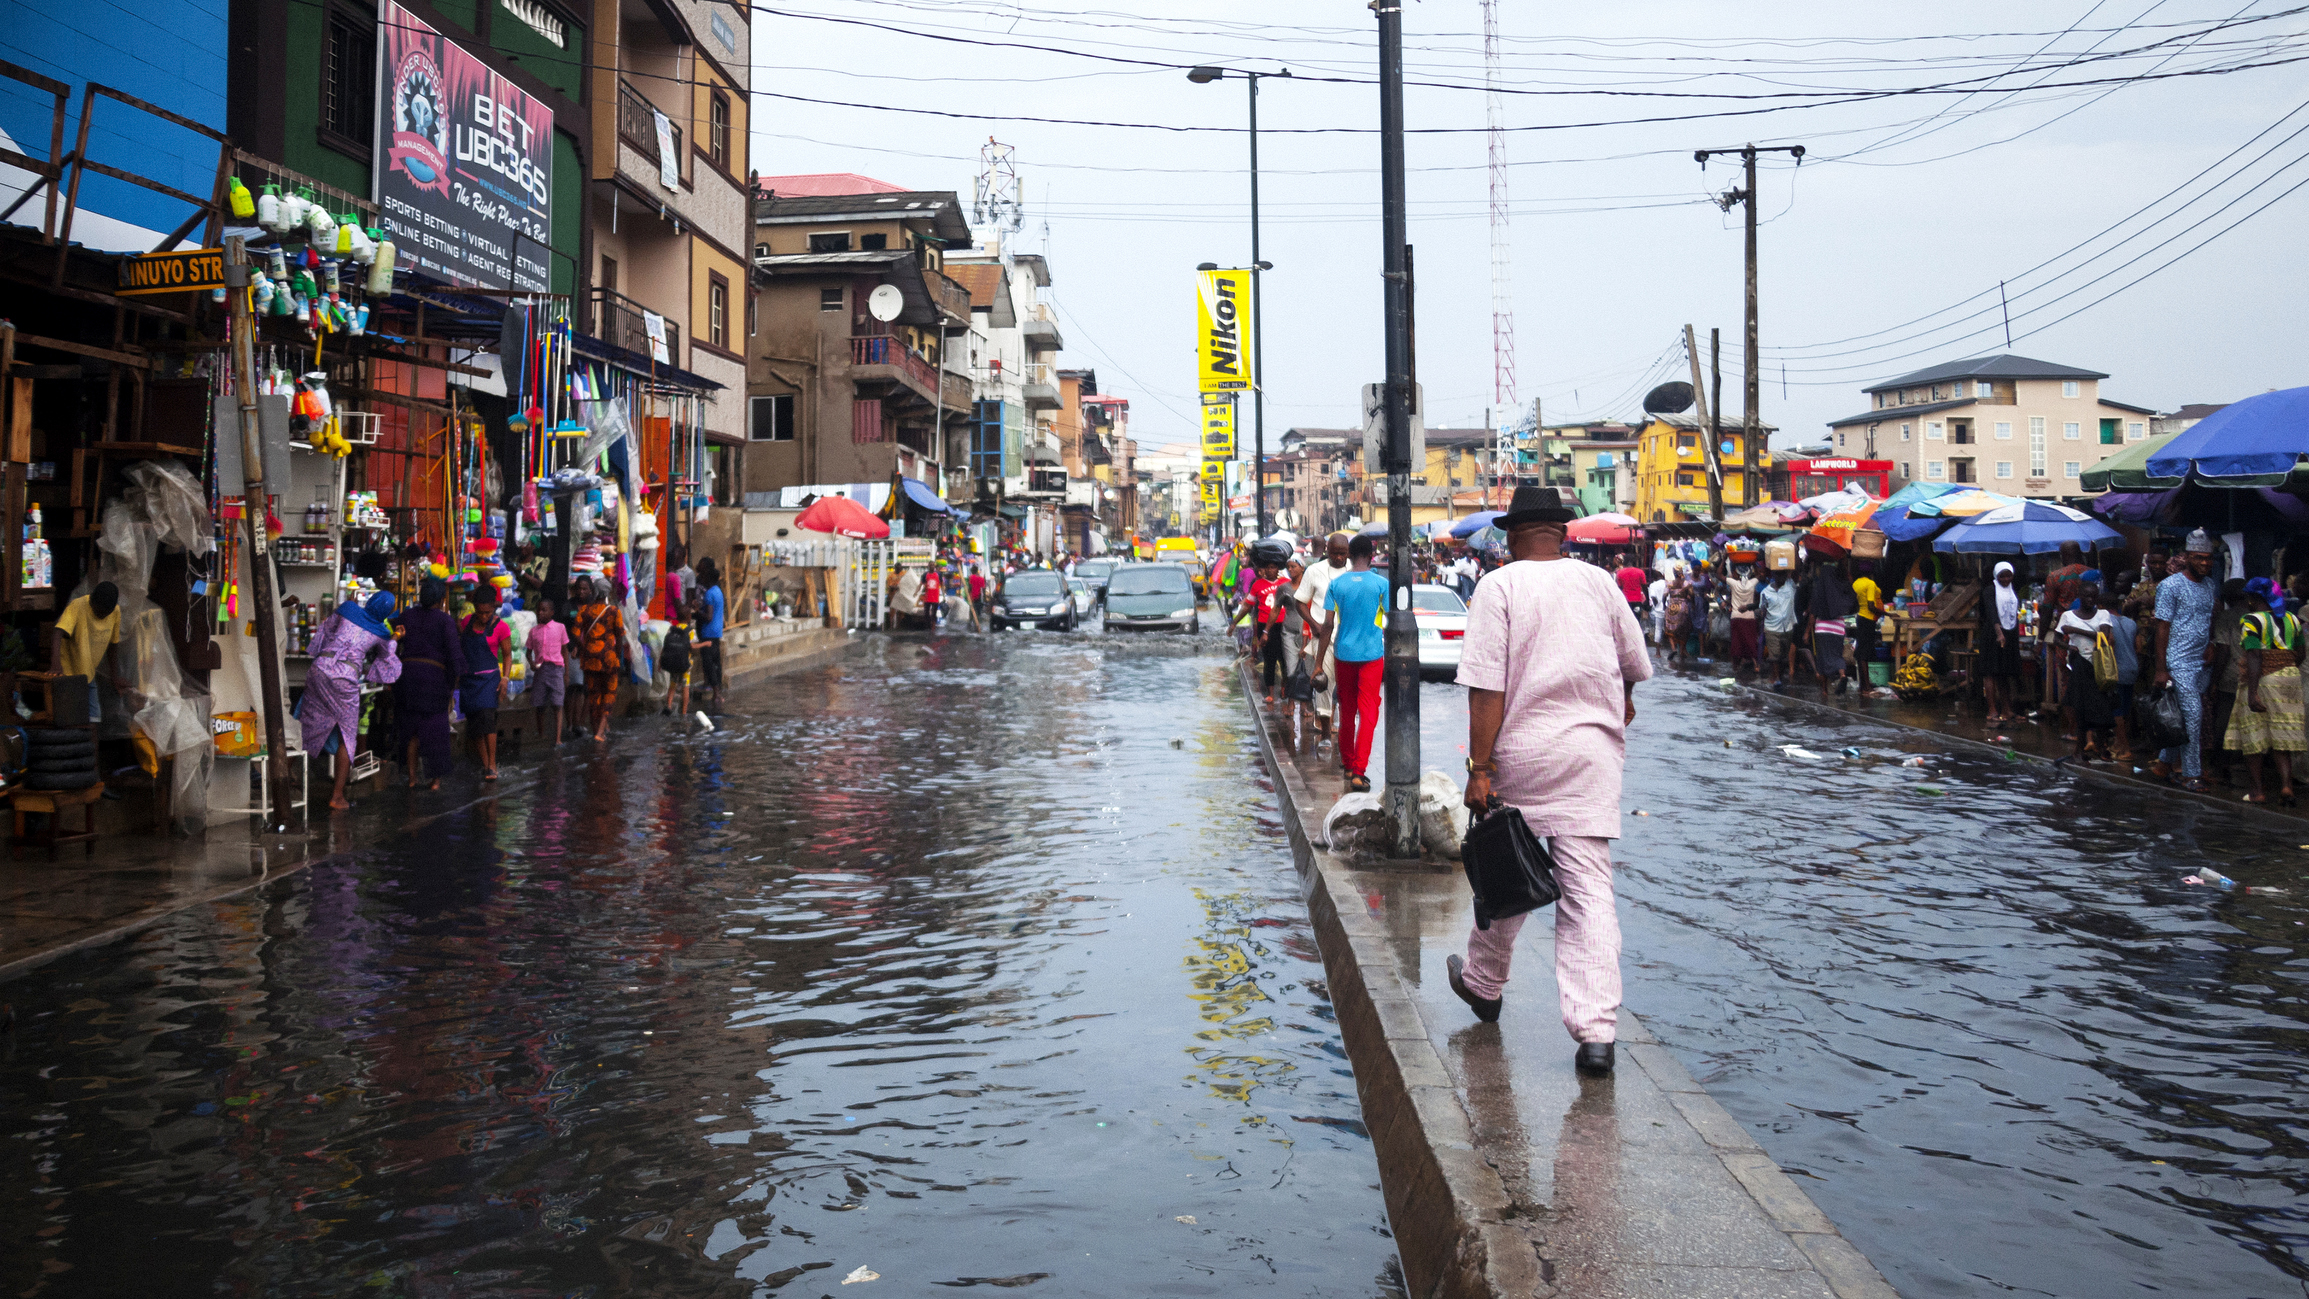 Building resilience against flooding in urban areas